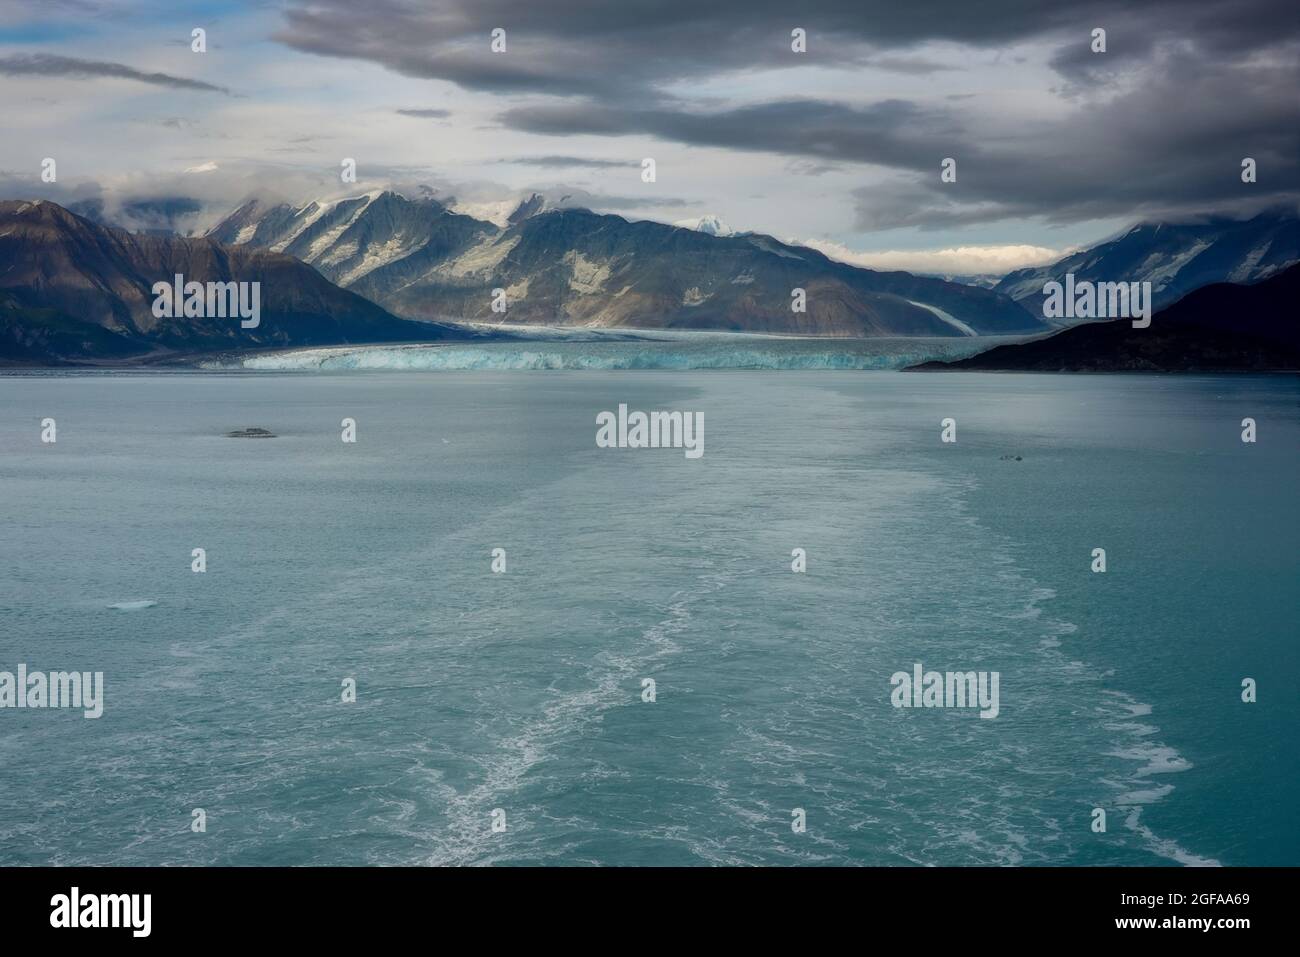 An Illustration of the wake of a cruise ship sailing away from Hubbard Glacier with a view of the glacier and mountains. Stock Photo